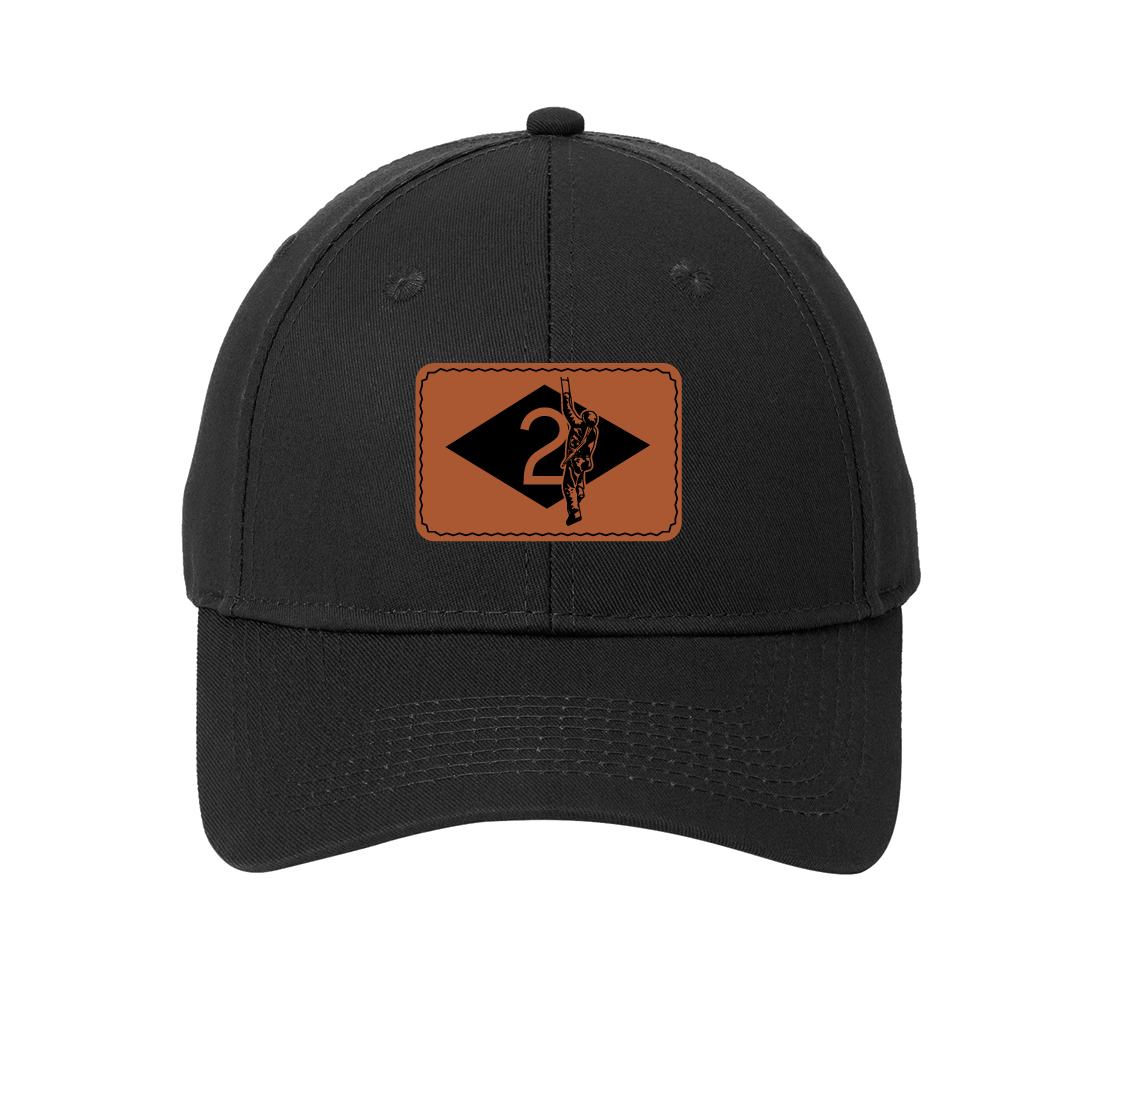 Donate $75 and receive a Pointe Du Hoc Foundation hat